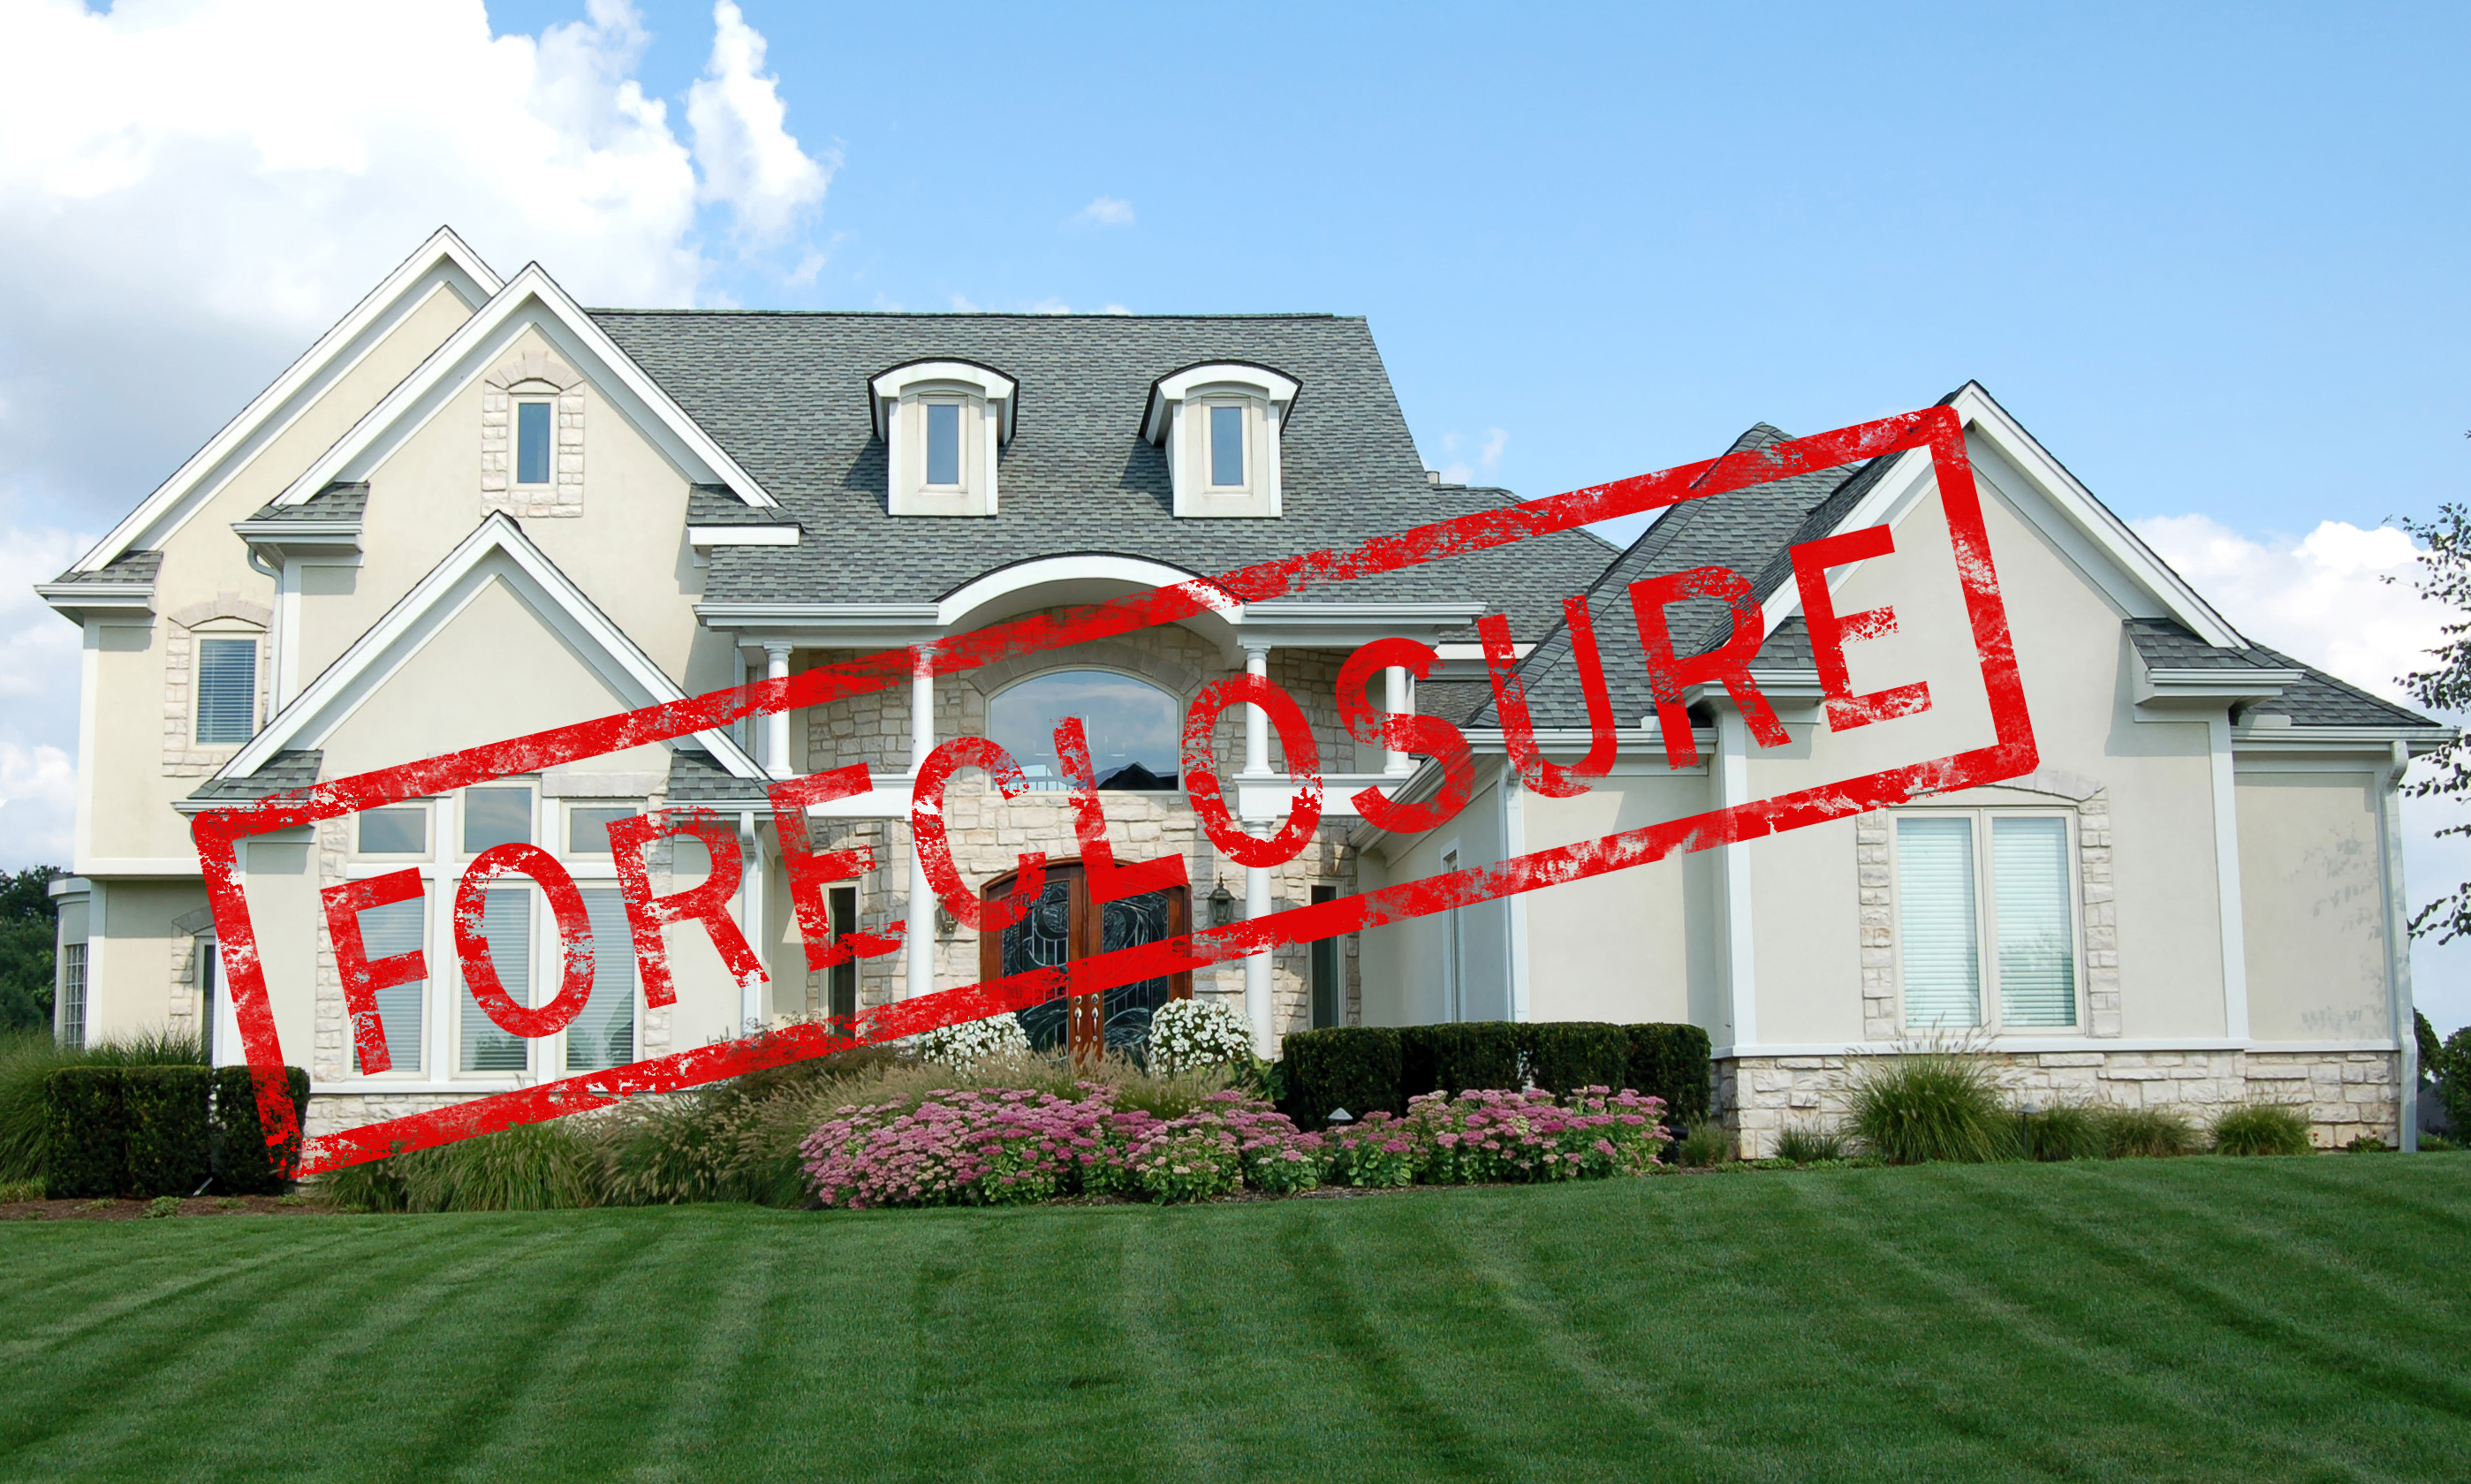 Call The August Group Inc. when you need valuations pertaining to Saint Louis foreclosures